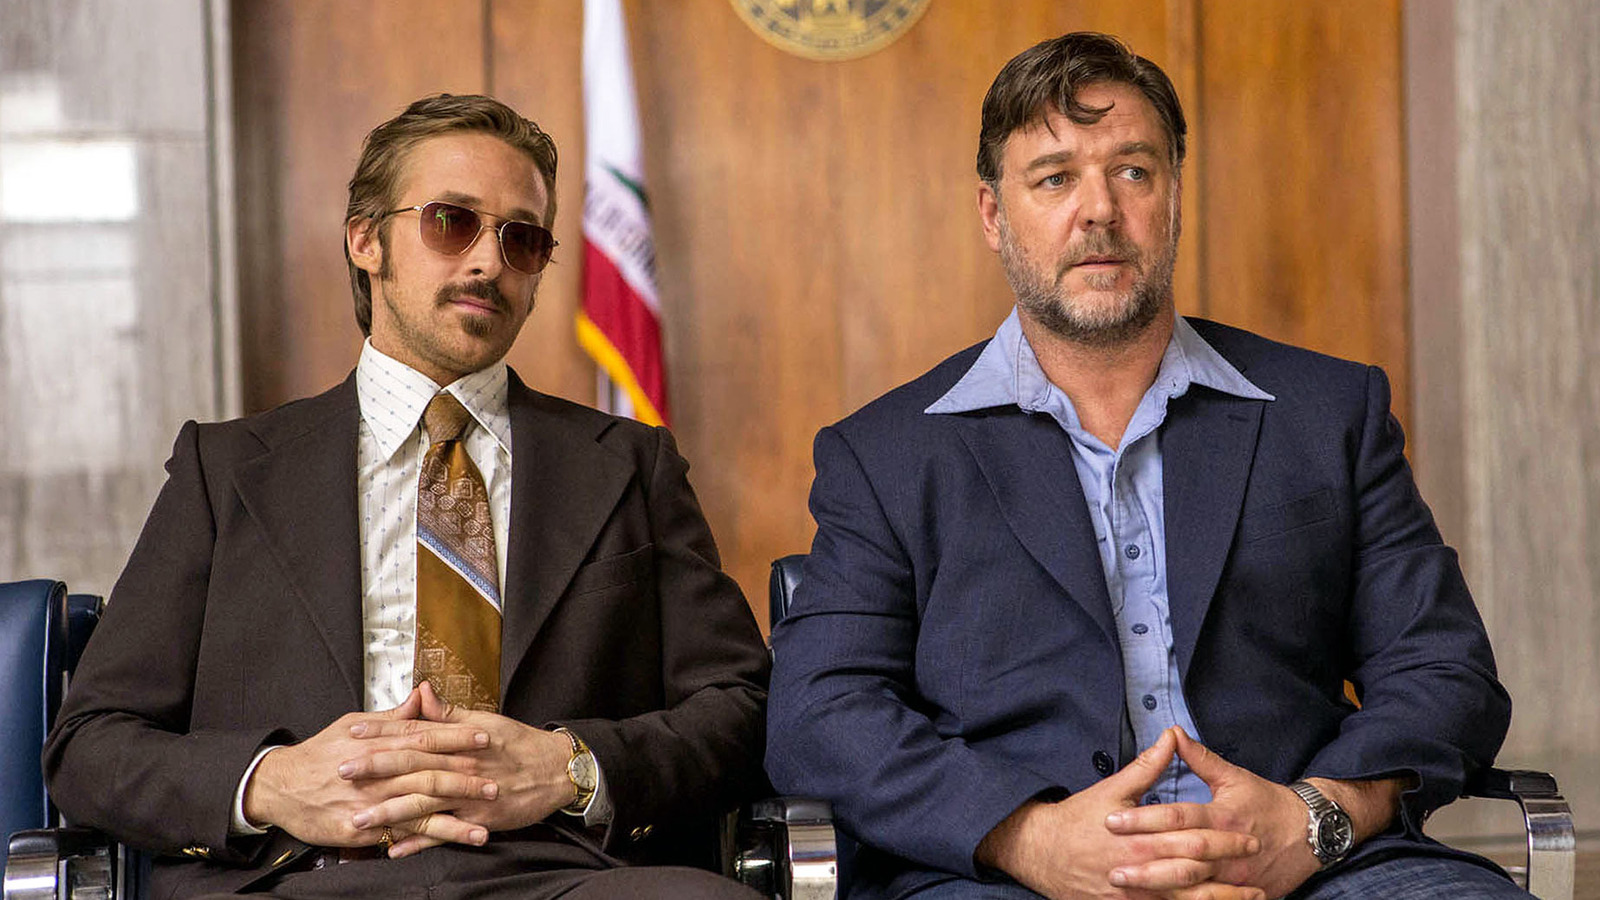 The Nice Guys 2 Isn't Happening, And Ryan Gosling Blames A Forgotten
Animated Movie